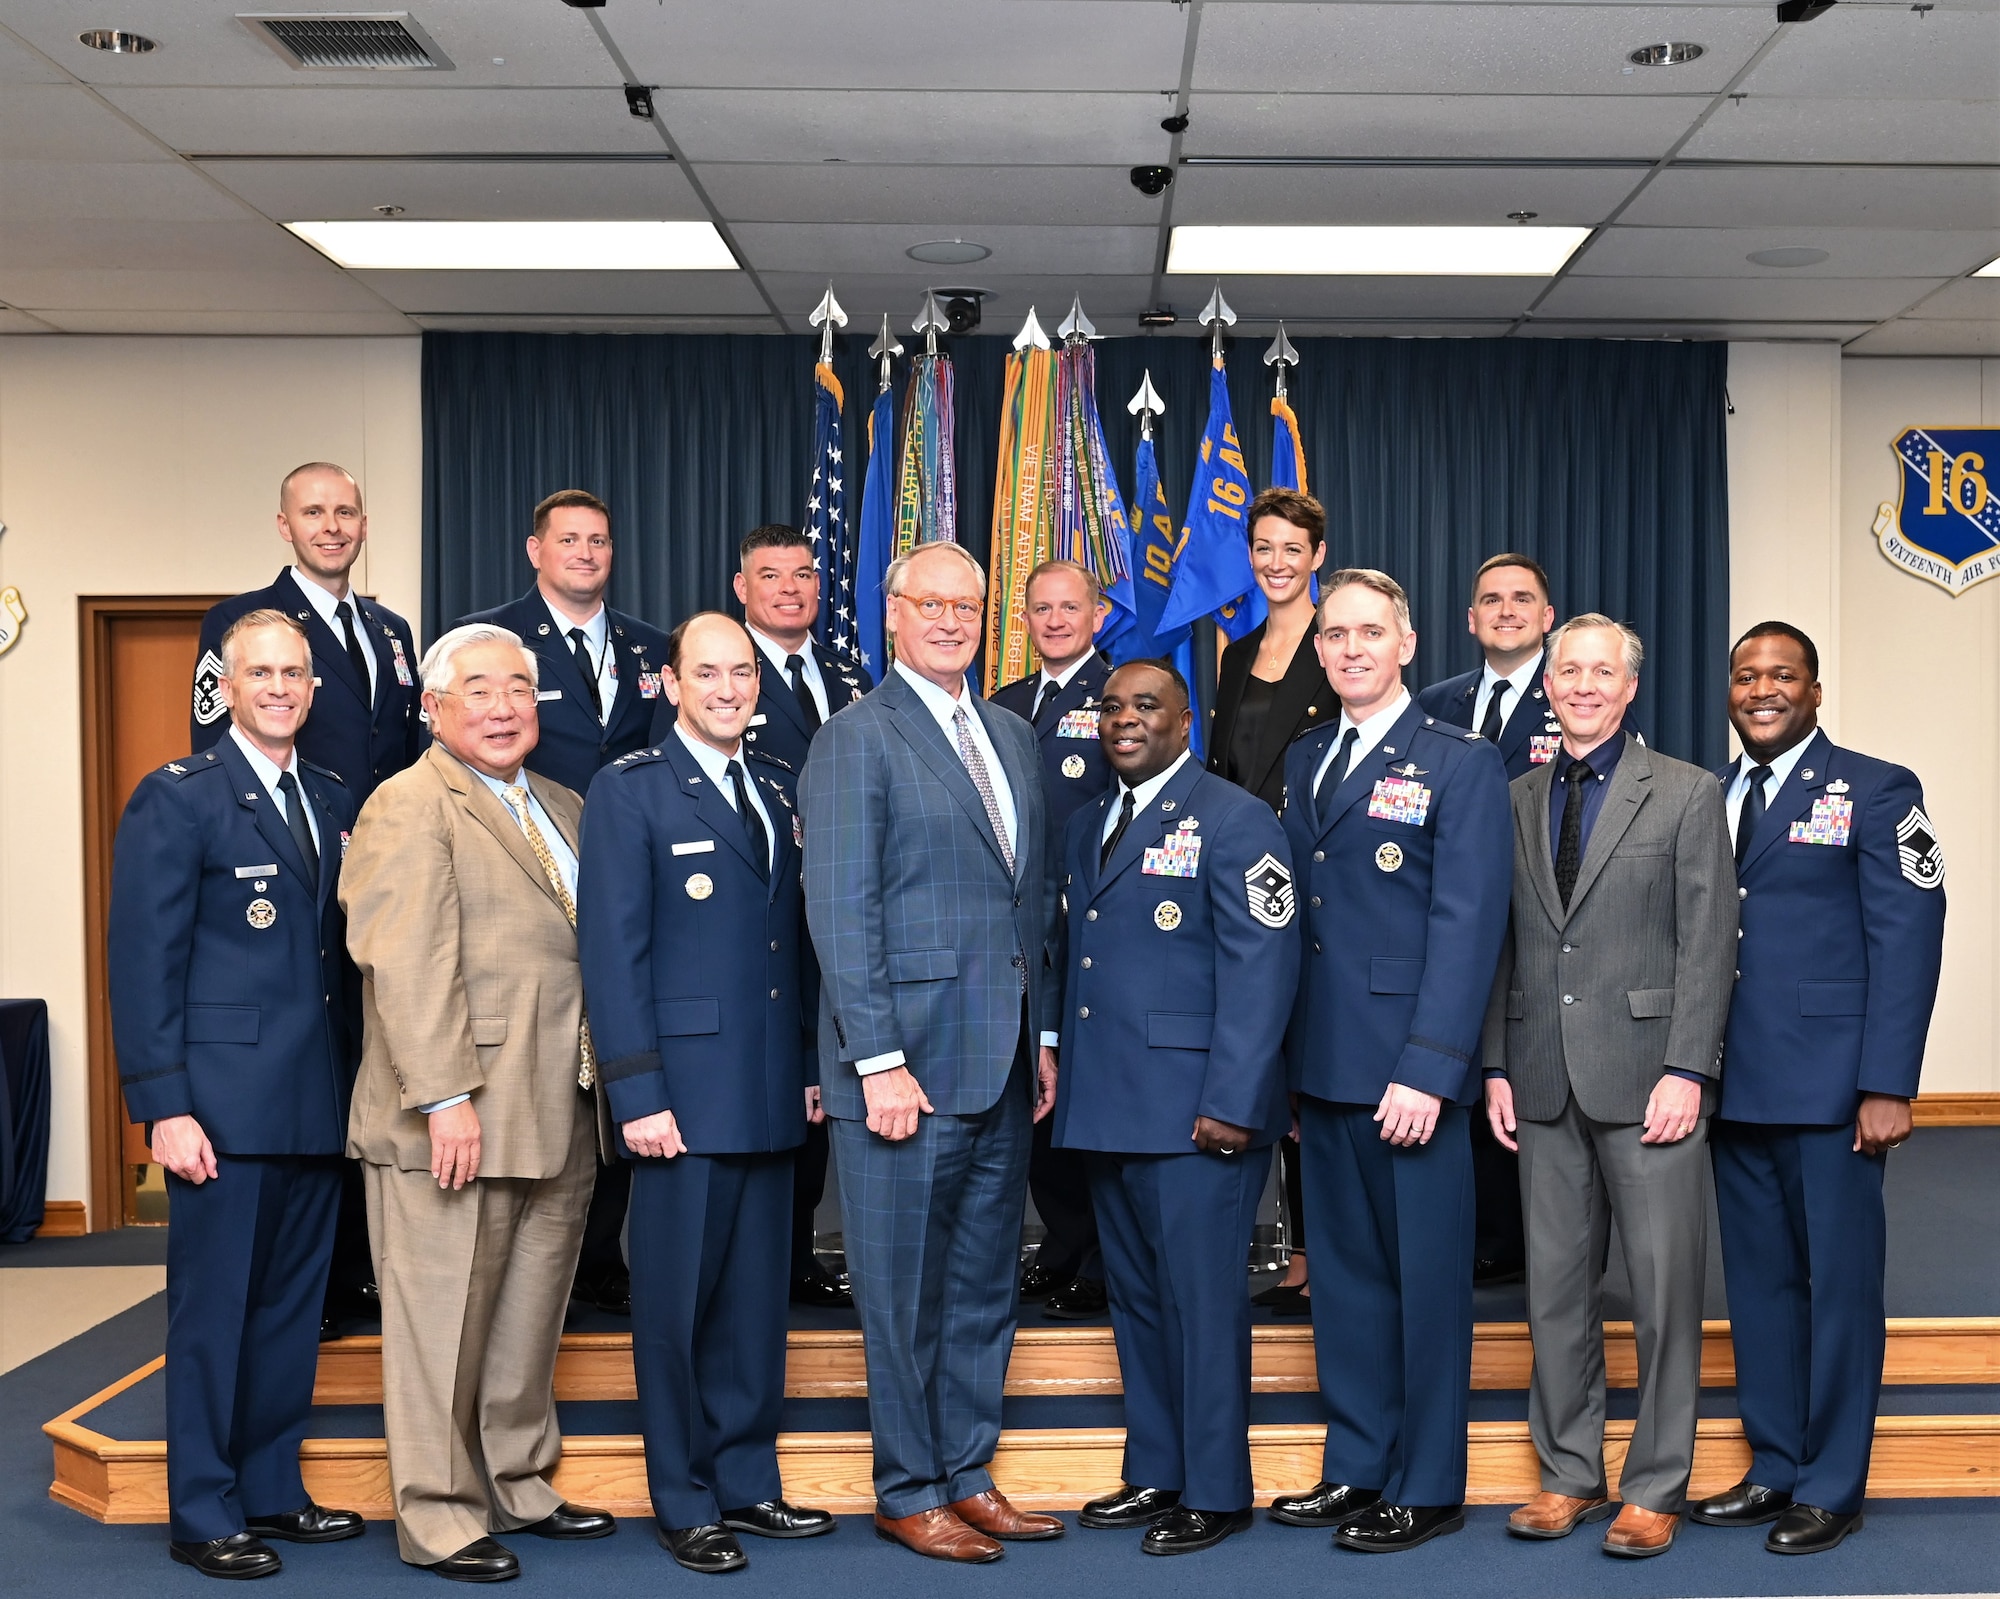 Sixteenth Air Force (Air Forces Cyber) leadership and their respective ‘honorary commanders’ pose for photo after the 16th Air Force Civic Leader Induction Ceremony April 1, 2024, at the Bernard A. Larger Auditorium, Joint Base San Antonio-Lackland, Texas. The civic leader program connects community leaders from the local San Antonio area with 16th Air Force unit leadership who engage, educate, and empower civic leaders (honorary commanders) as unofficial spokespersons who provide ideas and feedback to commanders as to how Air Force missions can be best accomplished. (Air Force photo by Deirdre McNamara)